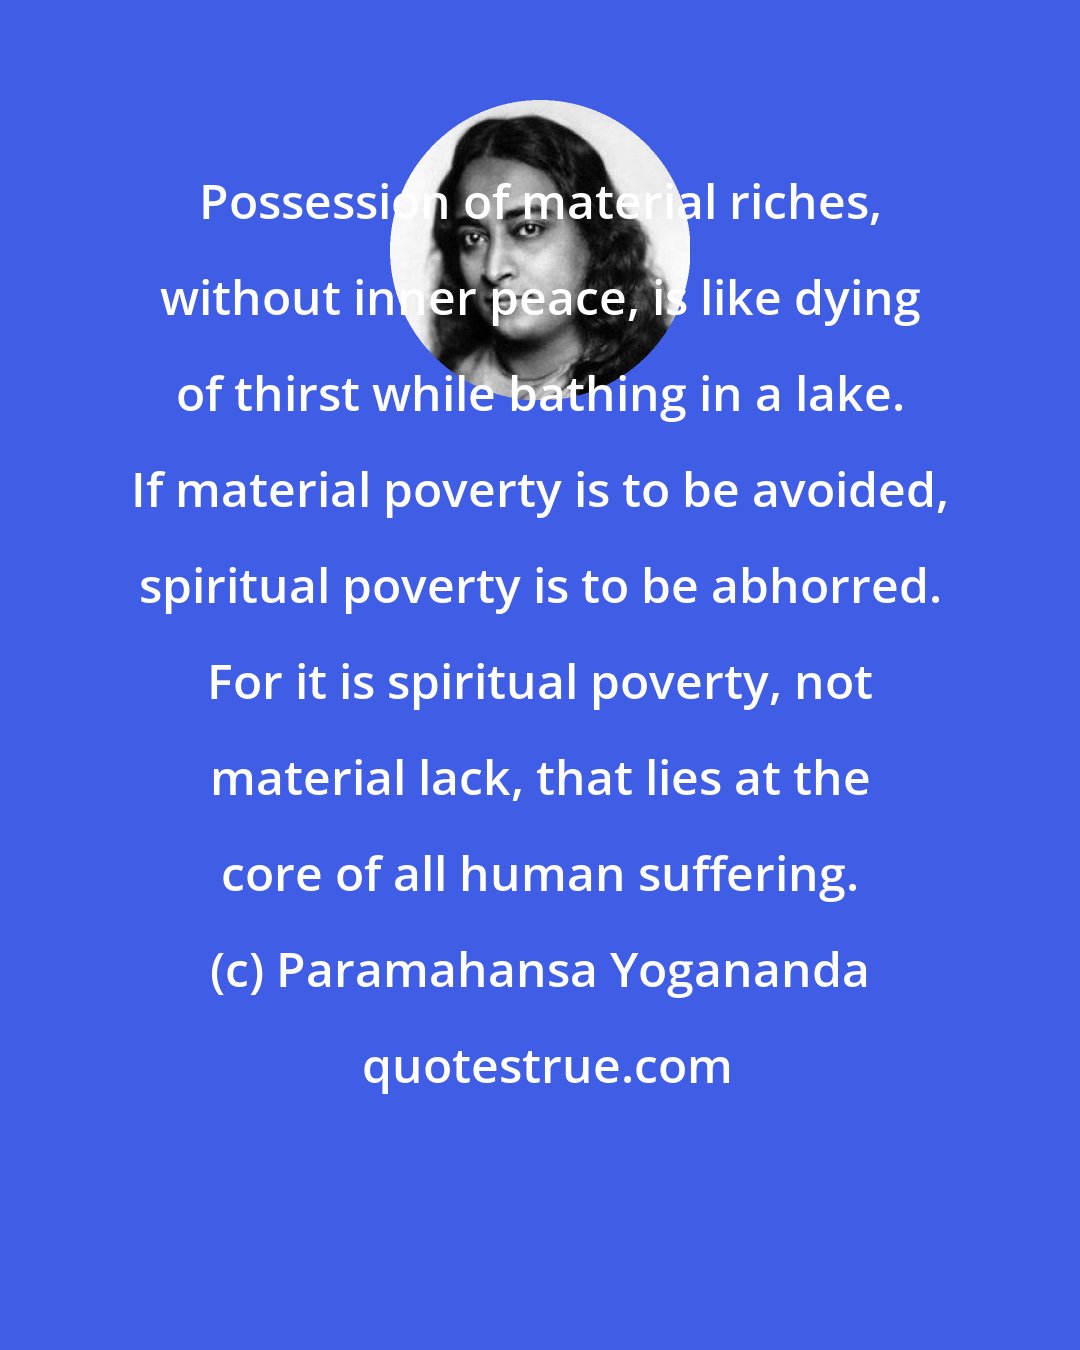 Paramahansa Yogananda: Possession of material riches, without inner peace, is like dying of thirst while bathing in a lake. If material poverty is to be avoided, spiritual poverty is to be abhorred. For it is spiritual poverty, not material lack, that lies at the core of all human suffering.